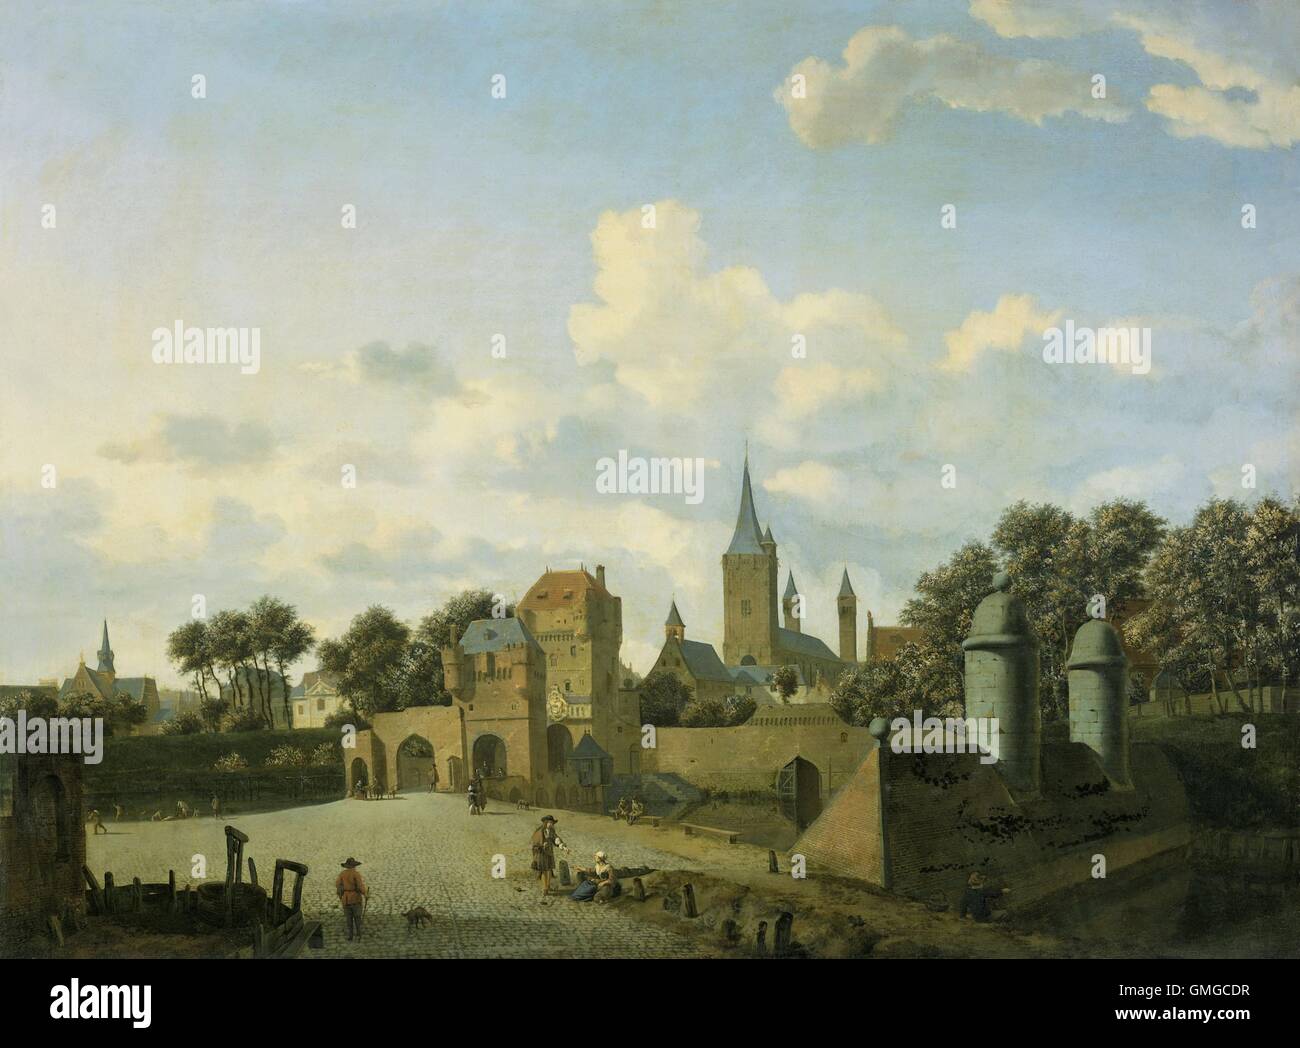 St. Severin in Cologne Set in an Imaginary Cityscape, by Jan van der Heyden/Adriaen van de Velde,1660-72. Dutch painting, oil on panel. St. Severin's distinctive towers as based on reality, but much of the painting in from the artist's imagination (BSLOC 2016 3 257) Stock Photo